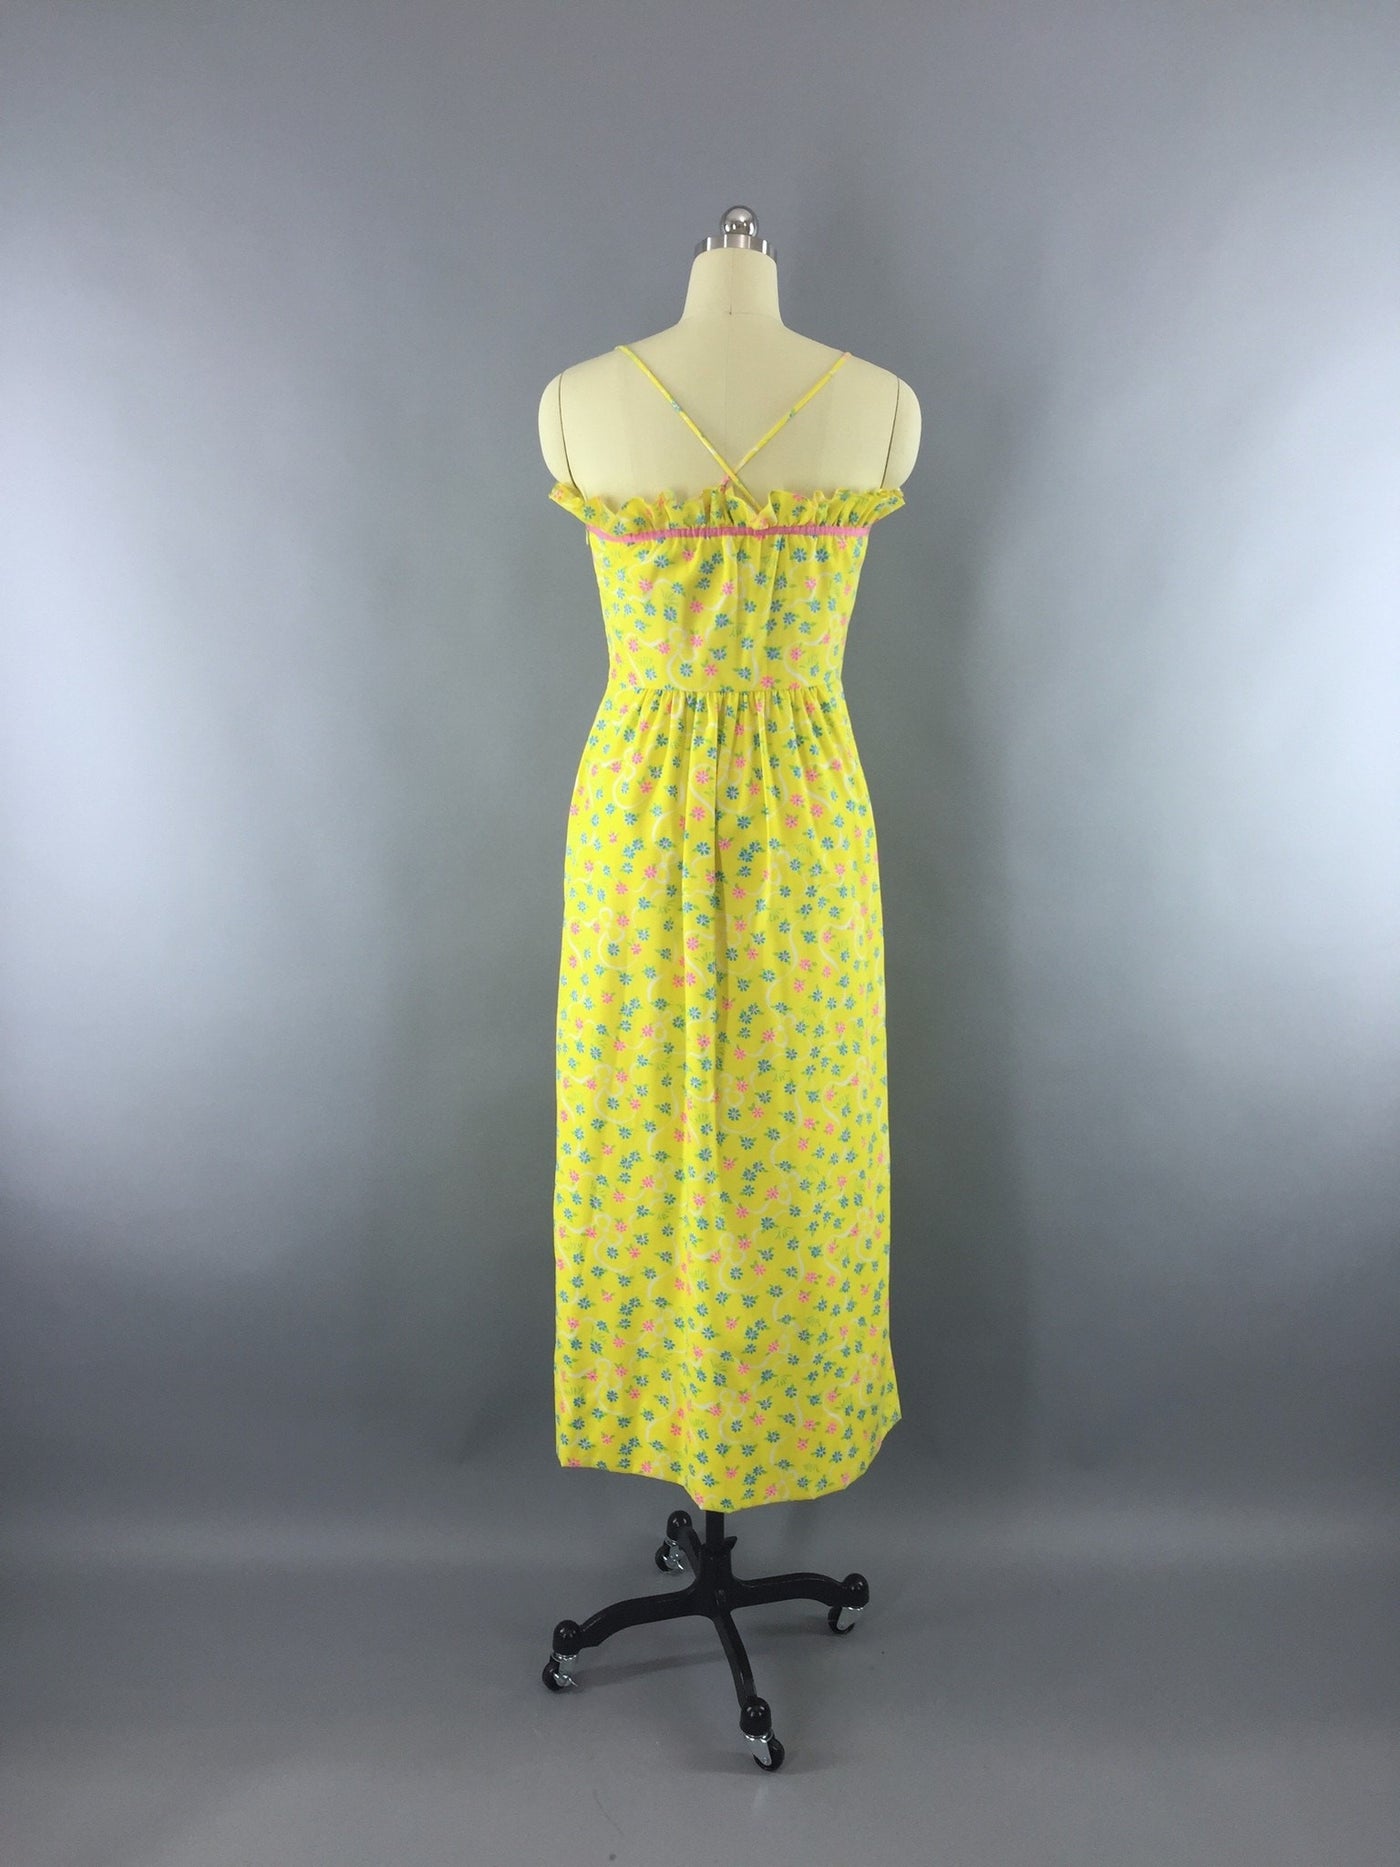 Vintage 1960s Lilly Pulitzer Dress / The Lilly Yellow Floral Print Max ...